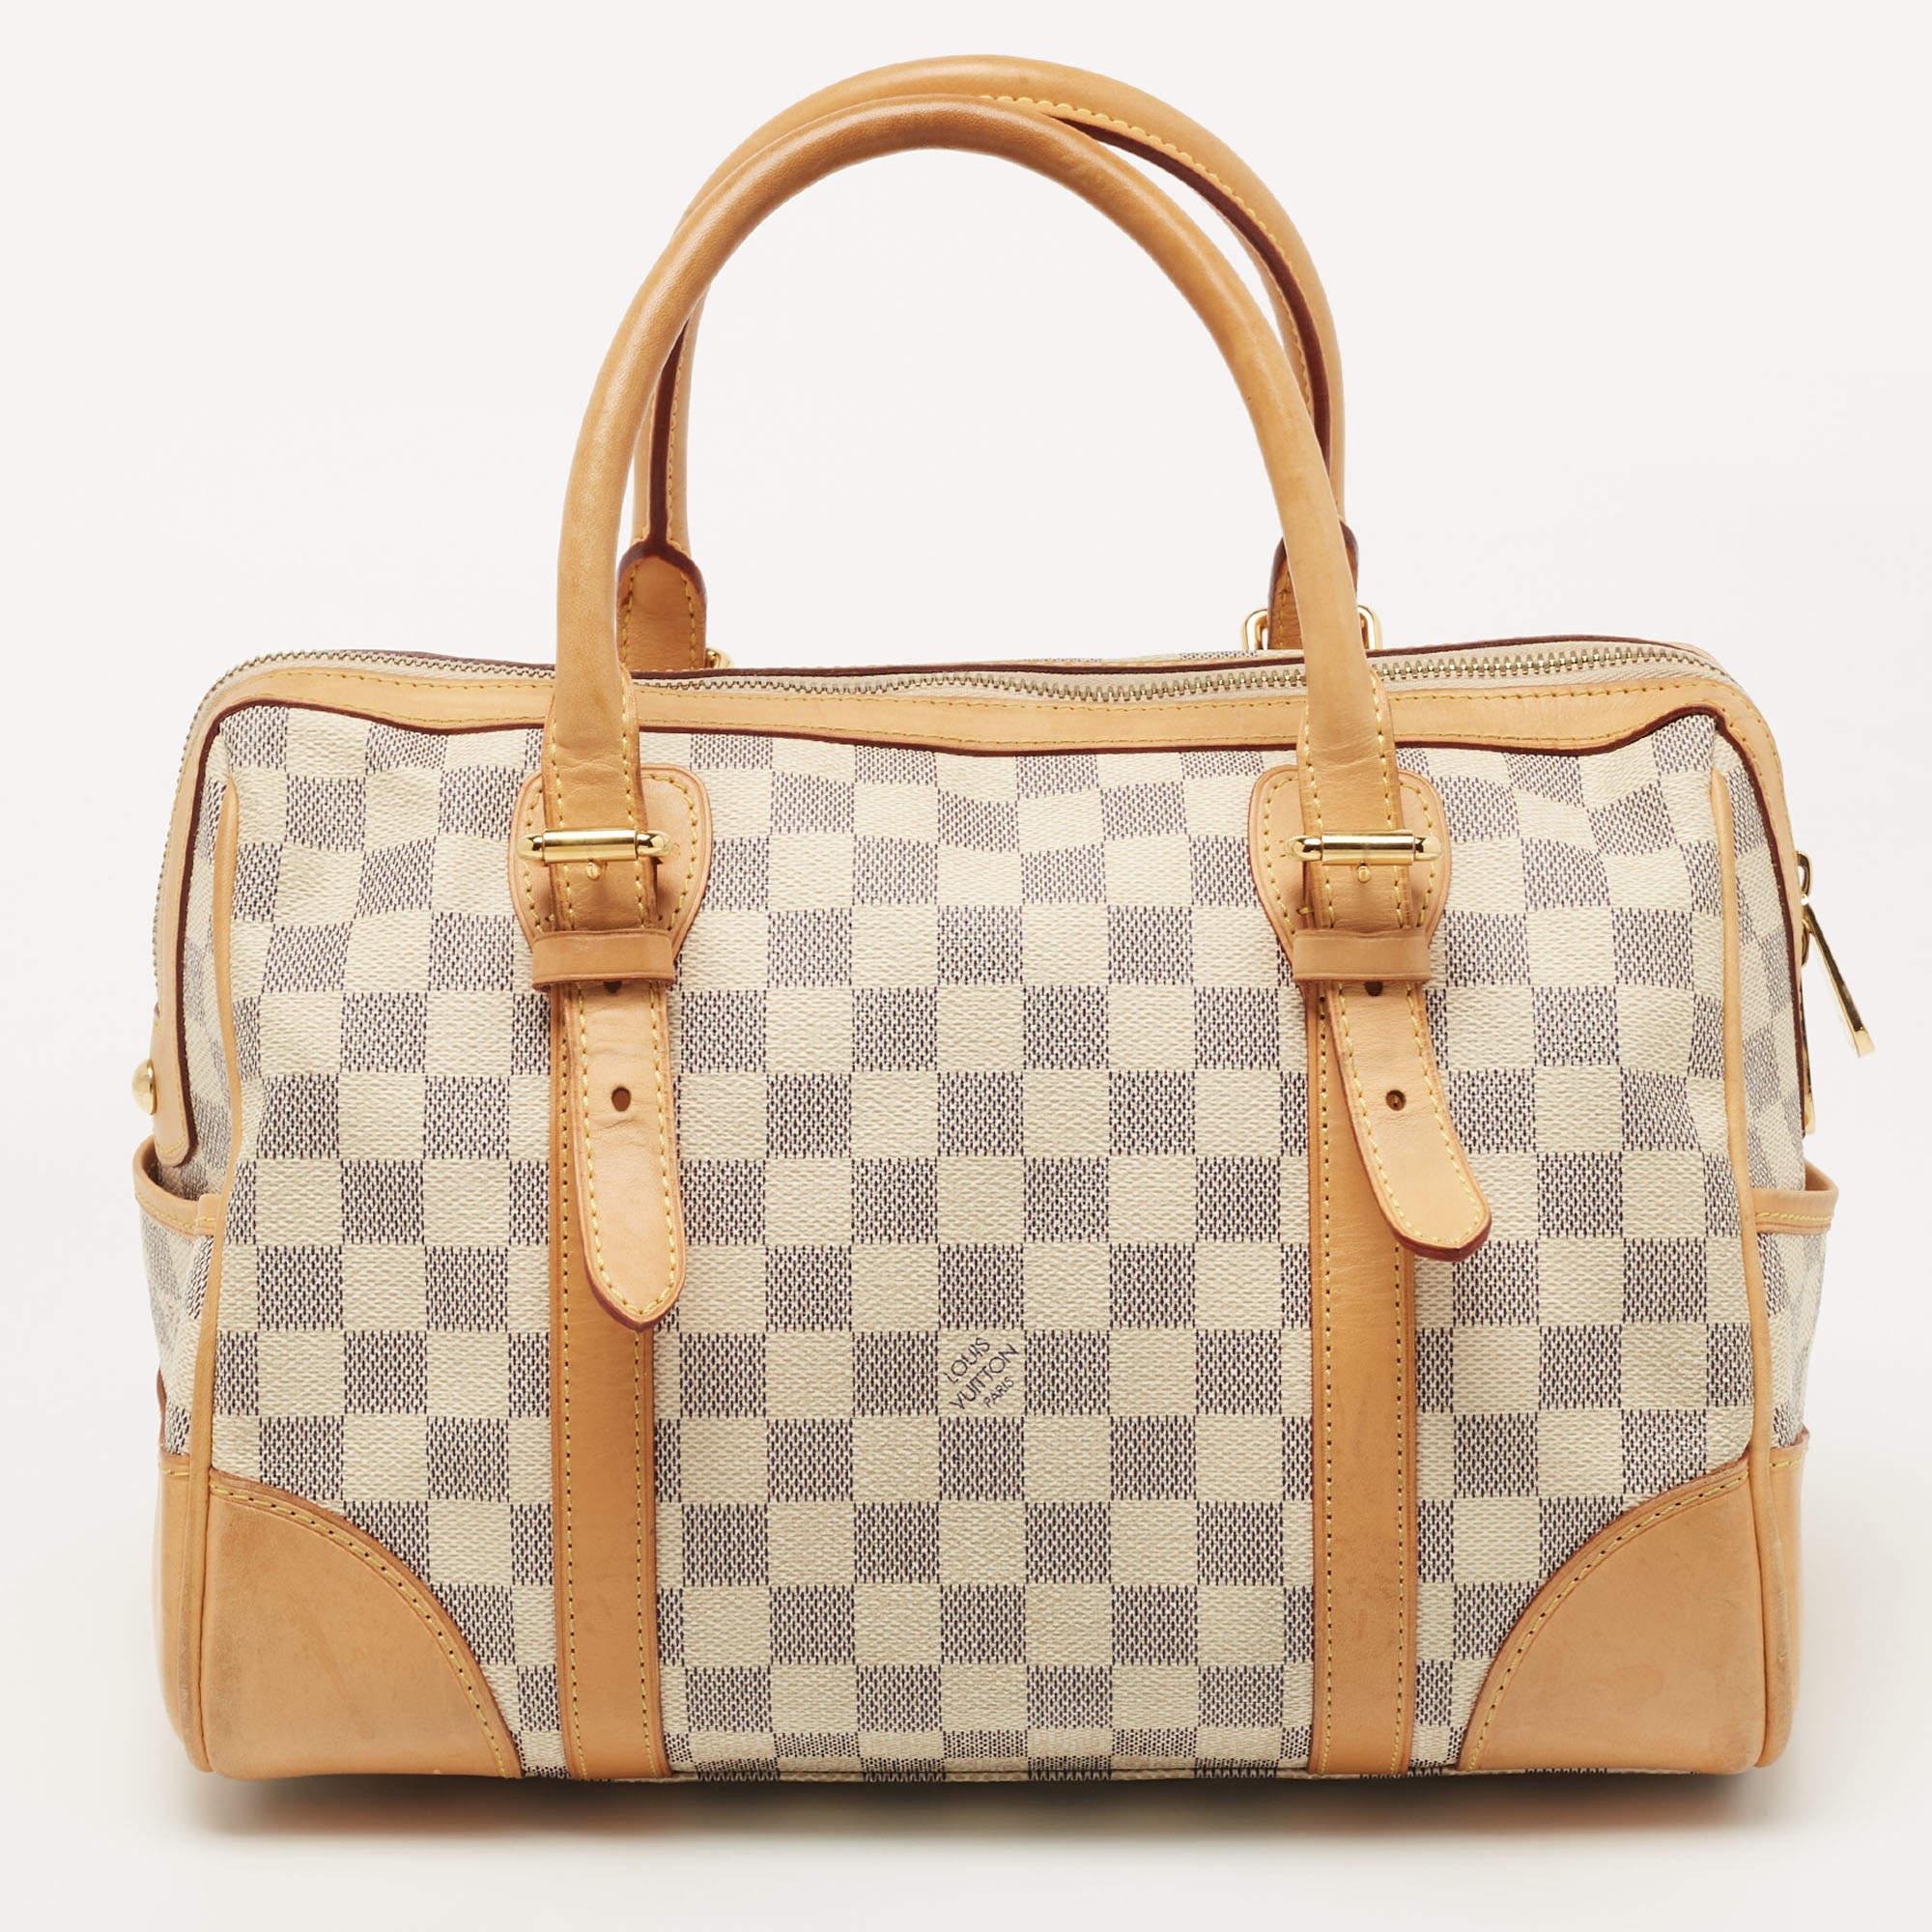 This authentic LV Berkeley bag for women is super classy and functional, perfect for everyday use. We like the simple details and its high-quality finish.

Includes: Original Dustbag

